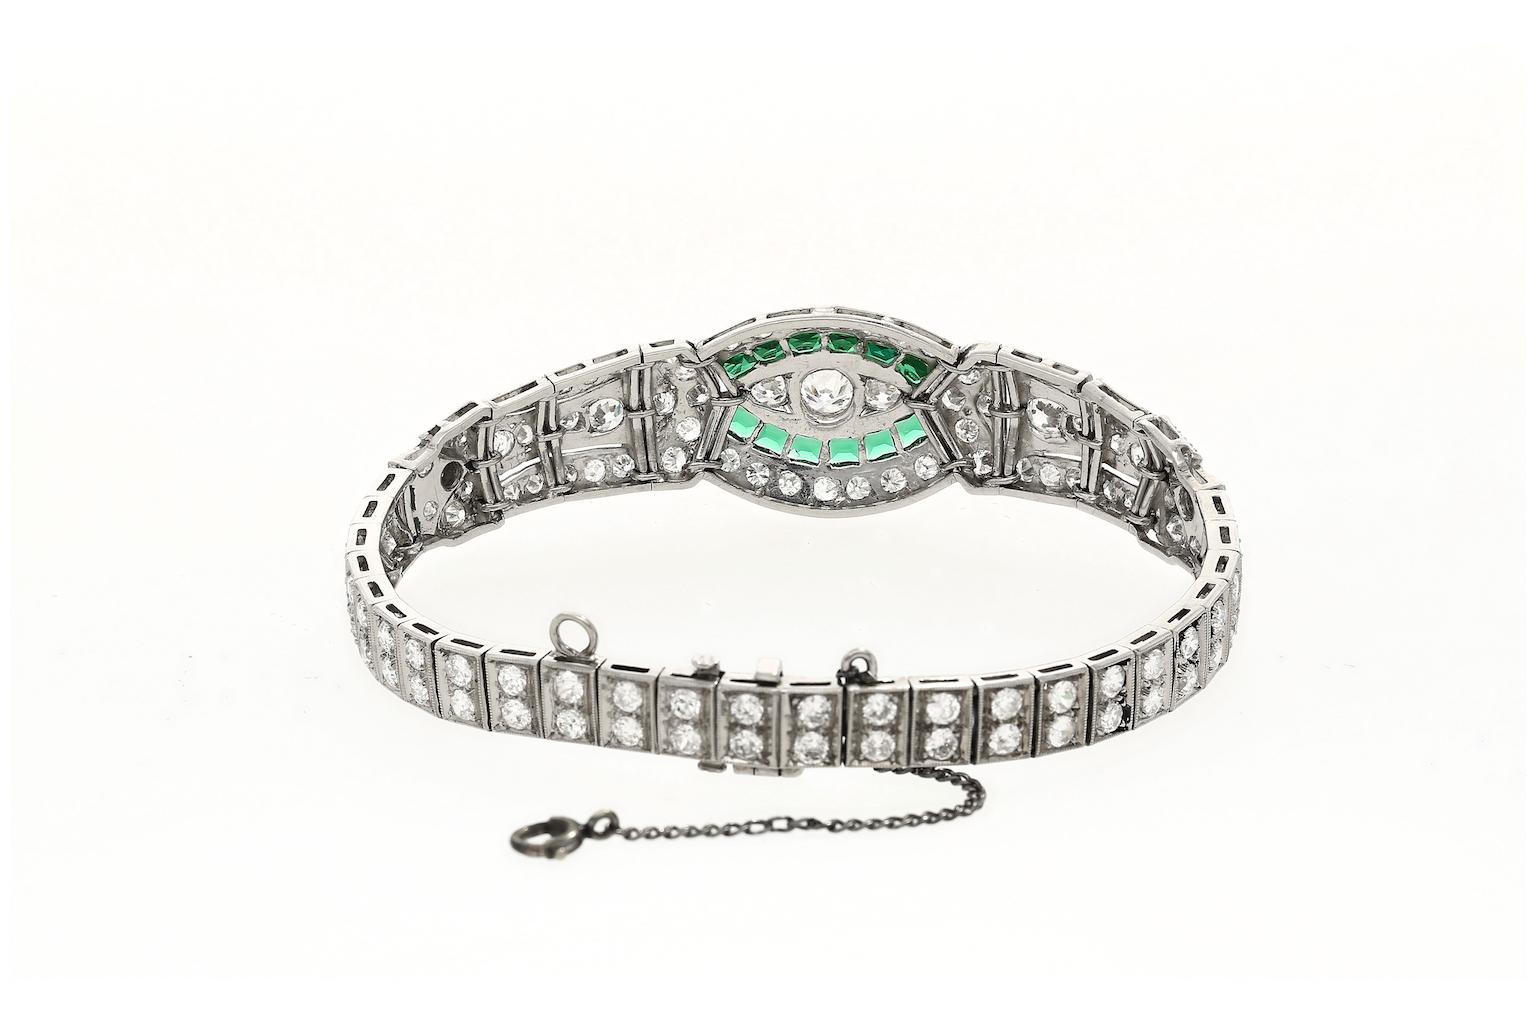 Vintage Art Deco Old Euro Cut Diamond and Emerald Bracelet in Platinum In Excellent Condition For Sale In Miami, FL